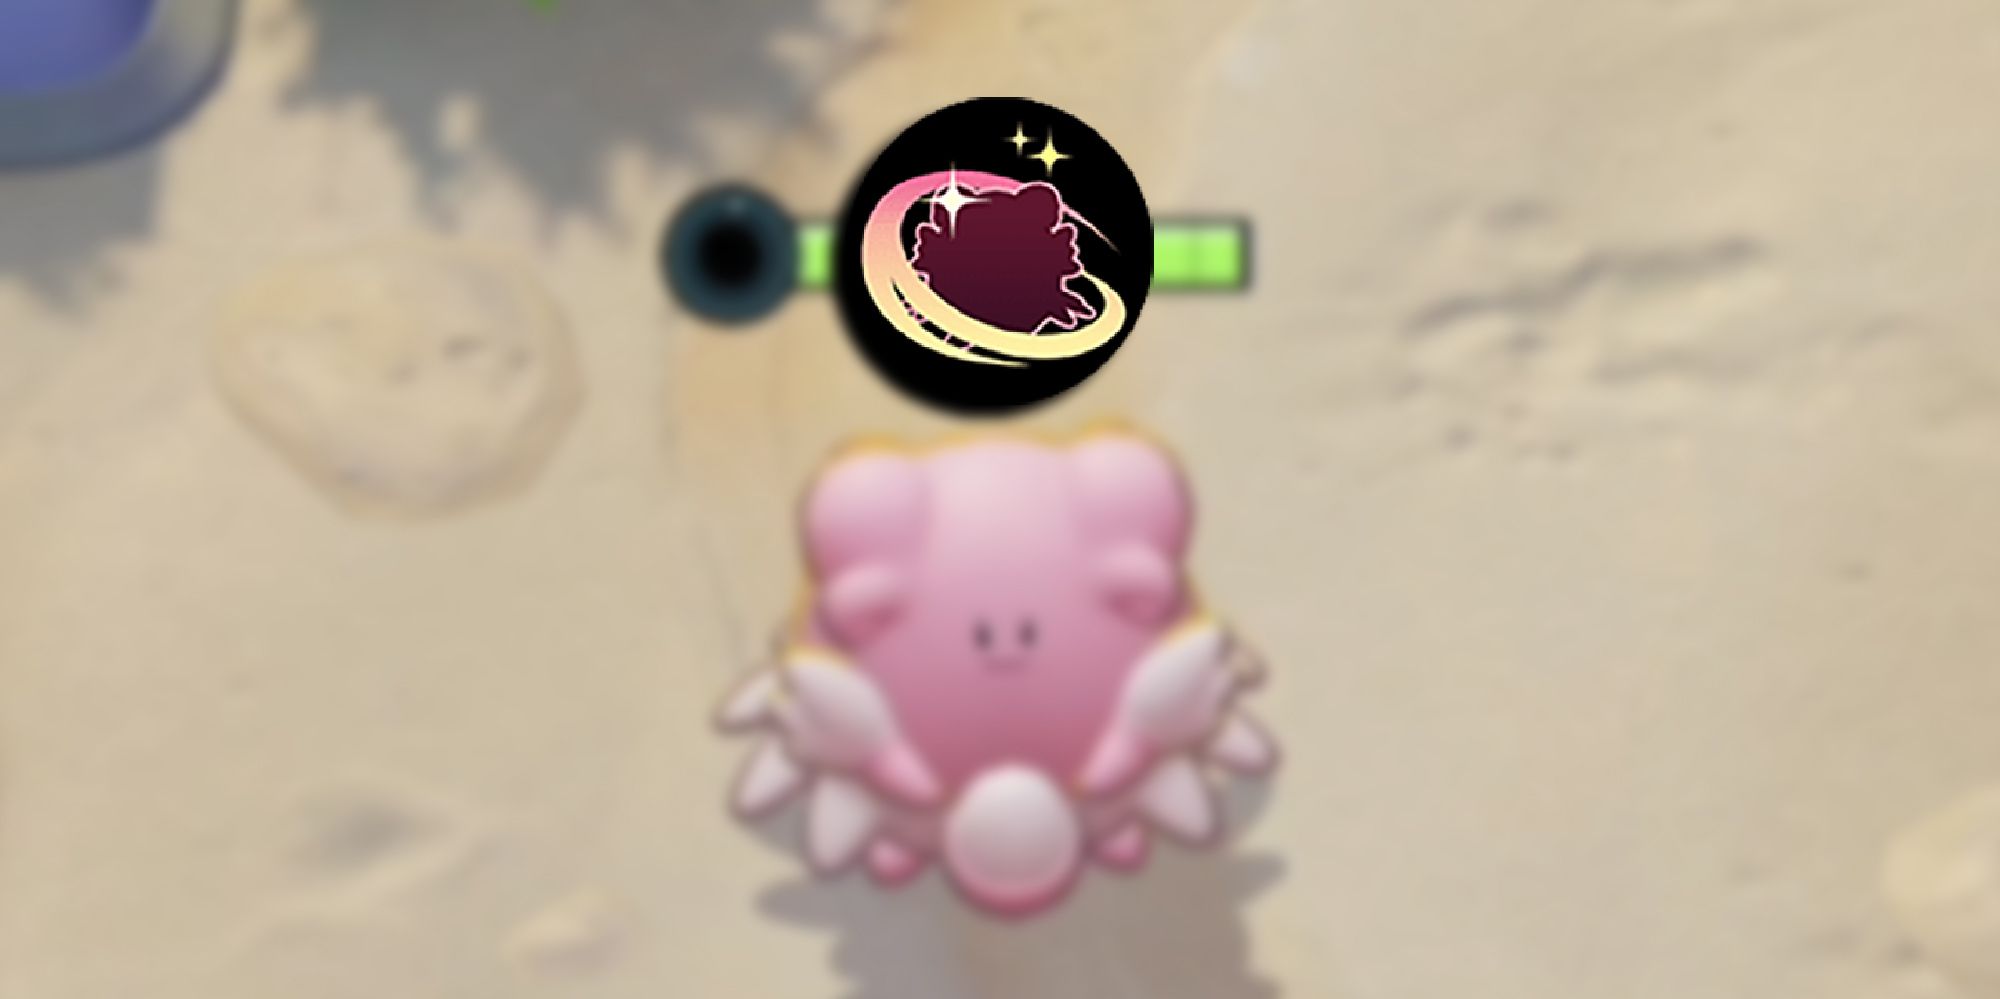 Pokemon Unite - PNG Of Natural Cure Passive Overlaid On Blurred Image Of Blissey In-Game